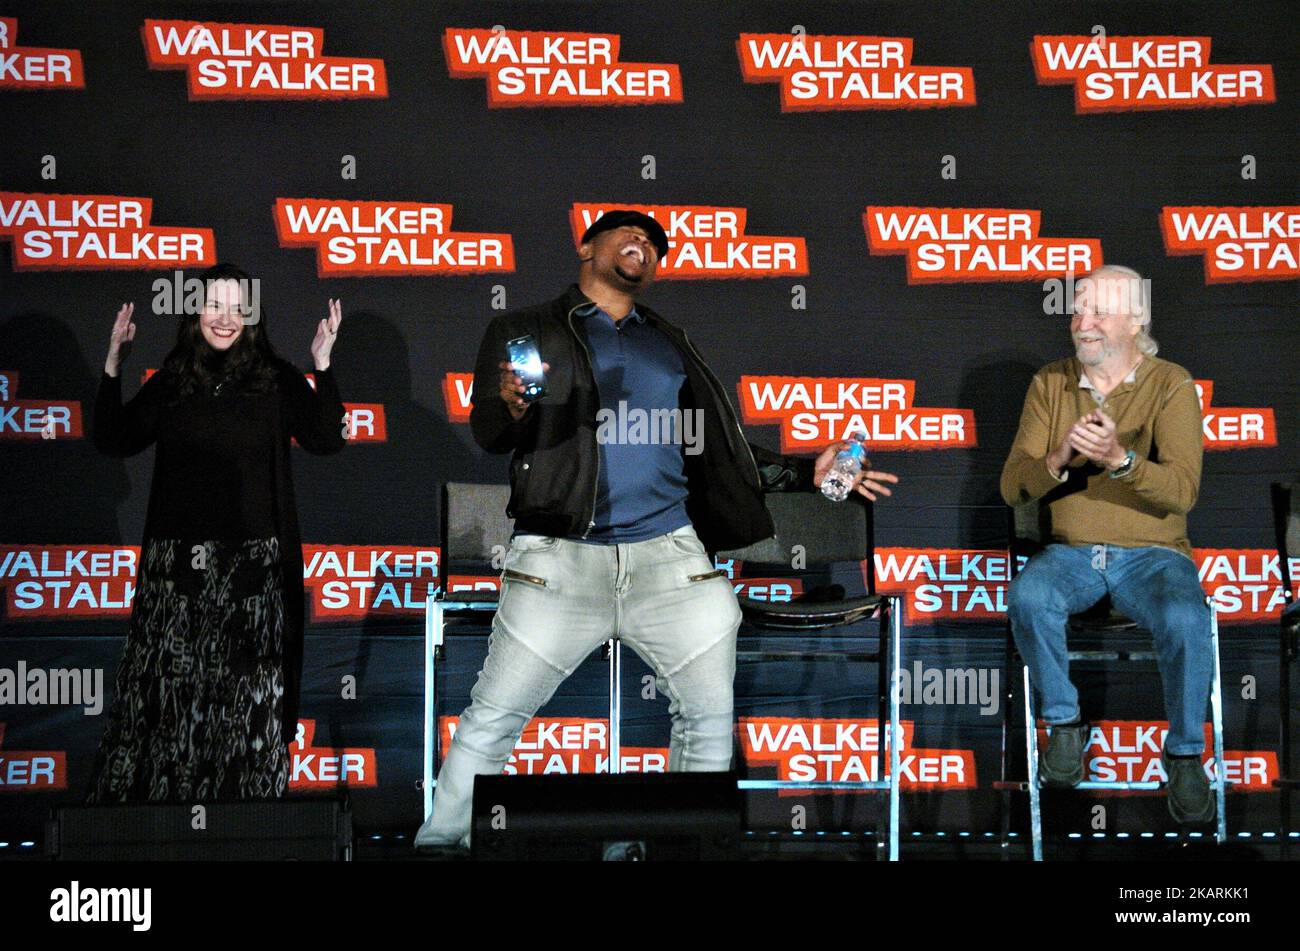 Scott Wilson, Laurie Holden and Irone Singleton talk about their time on the Walking Dead during a panel discussion at Walker Stalker Con in Philadelphia, PA on September 30, 2017. (Photo by Cory Clark/NurPhoto) Stock Photo